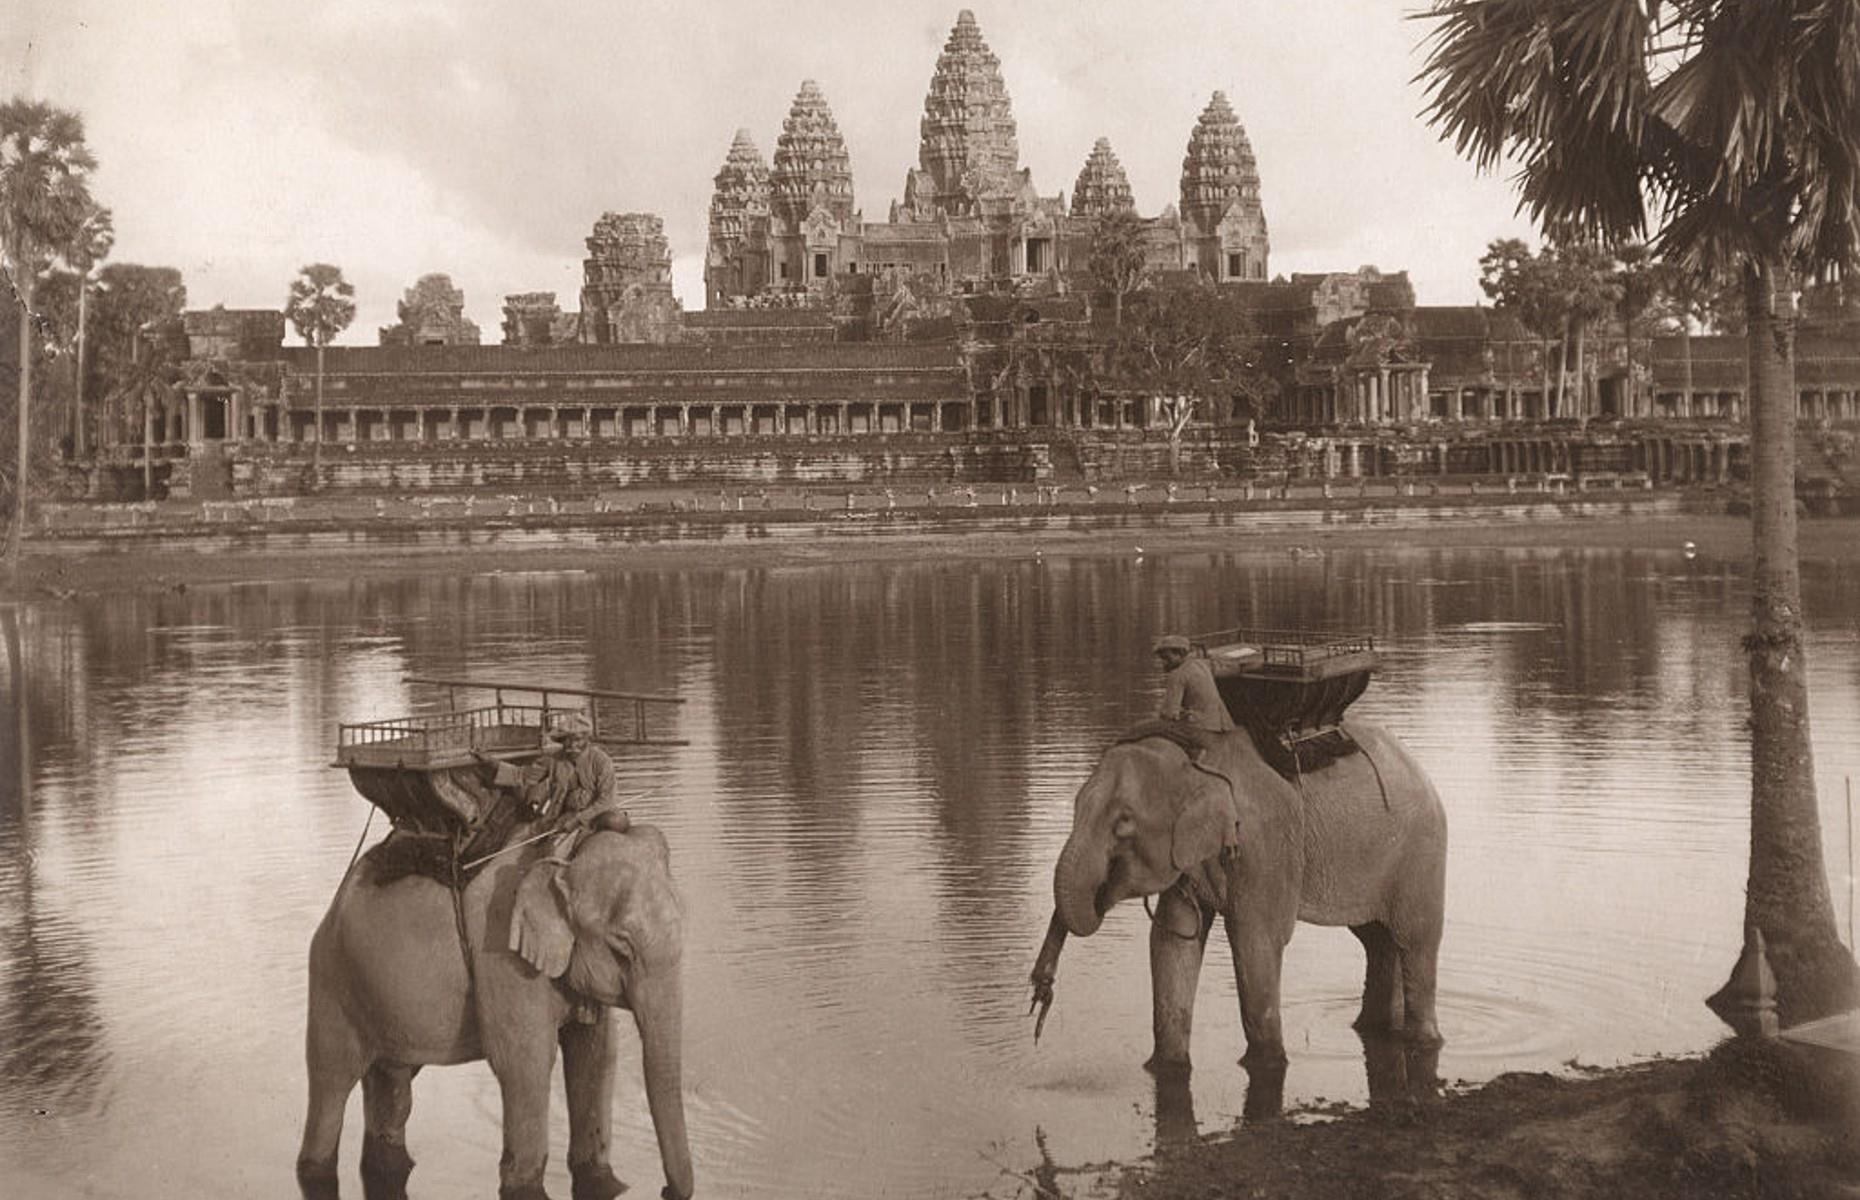 The amazing 12th-century temple complex of Angkor Wat in Cambodia attracted a staggering 2.6 million visitors in 2018. This is all the more amazing when you consider that, around 100 years earlier, hardly anyone had heard of its existence. The site was largely hidden by the jungle and only 'rediscovered' by Westerners in 1860, when it came under French control. Teams of workers were sent out and gradually pushed back the jungle to expose more of the amazing architecture and sculptures.